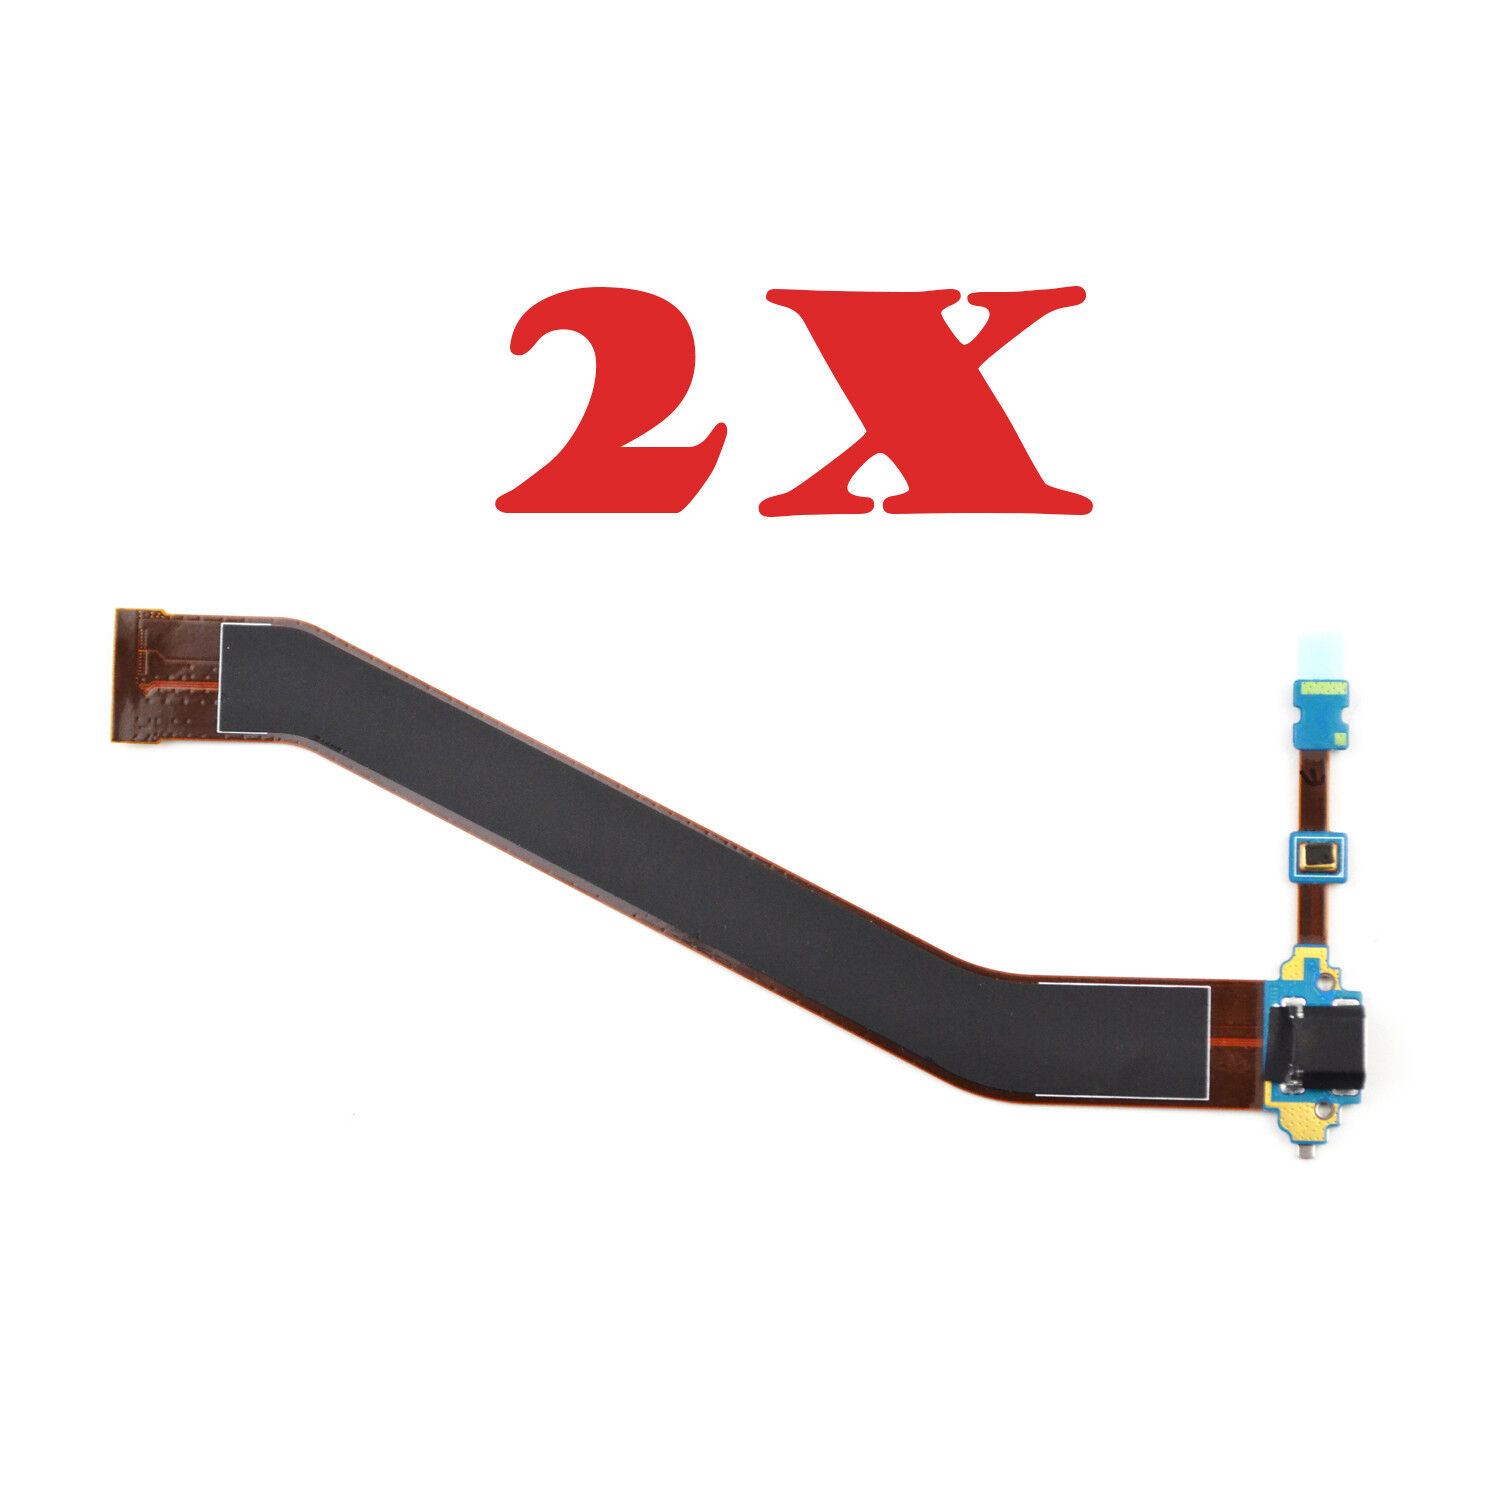 2X USB Charging Port Flex Cable For Samsung Galaxy Tab 3 10.1 GT-P5200 GT-P5210 Unbranded REV 1.0